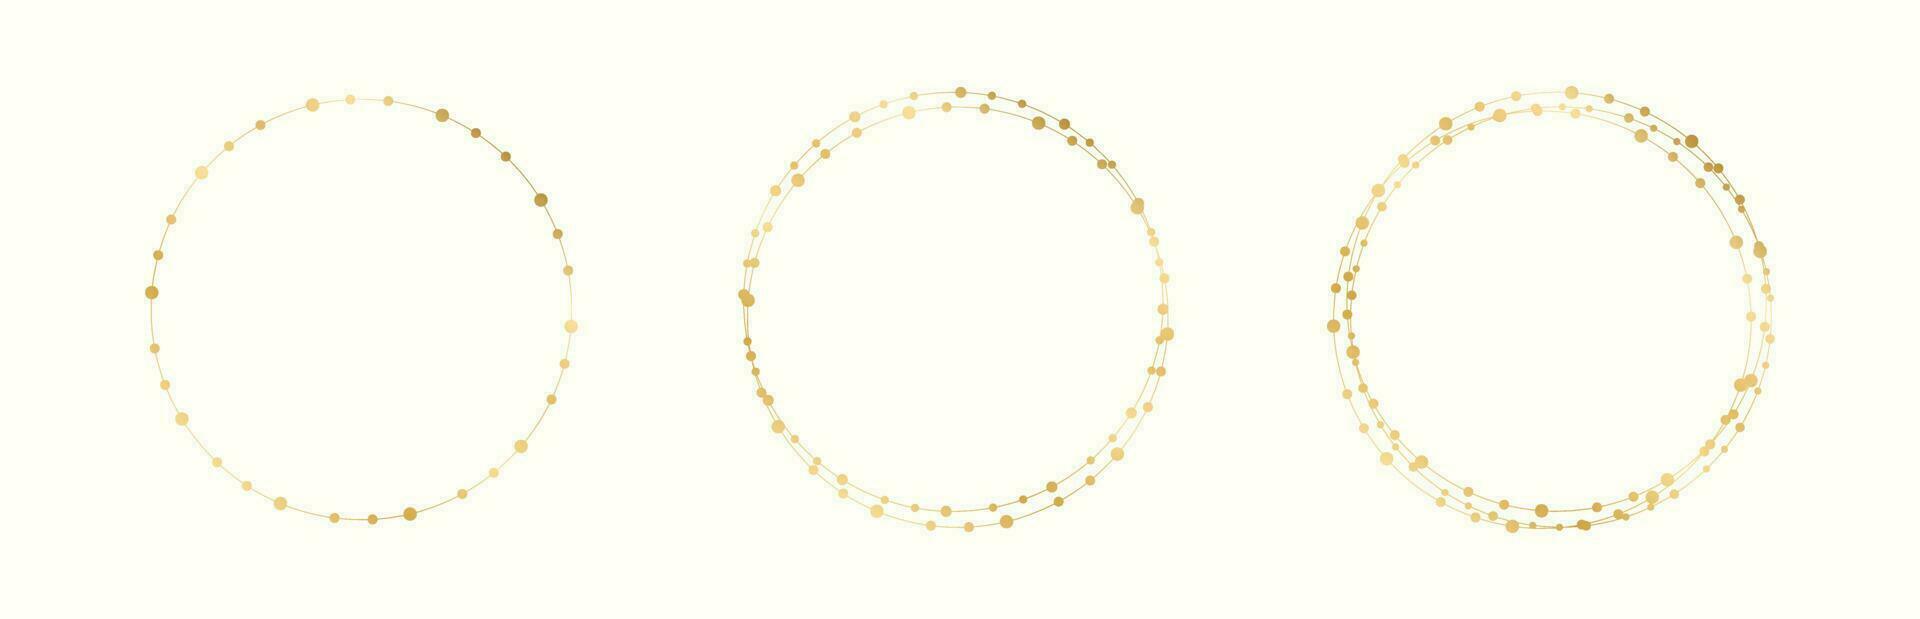 Gold Round Christmas Fairy Lights Frame Border Set. Abstract golden dots circle frame collection. vector